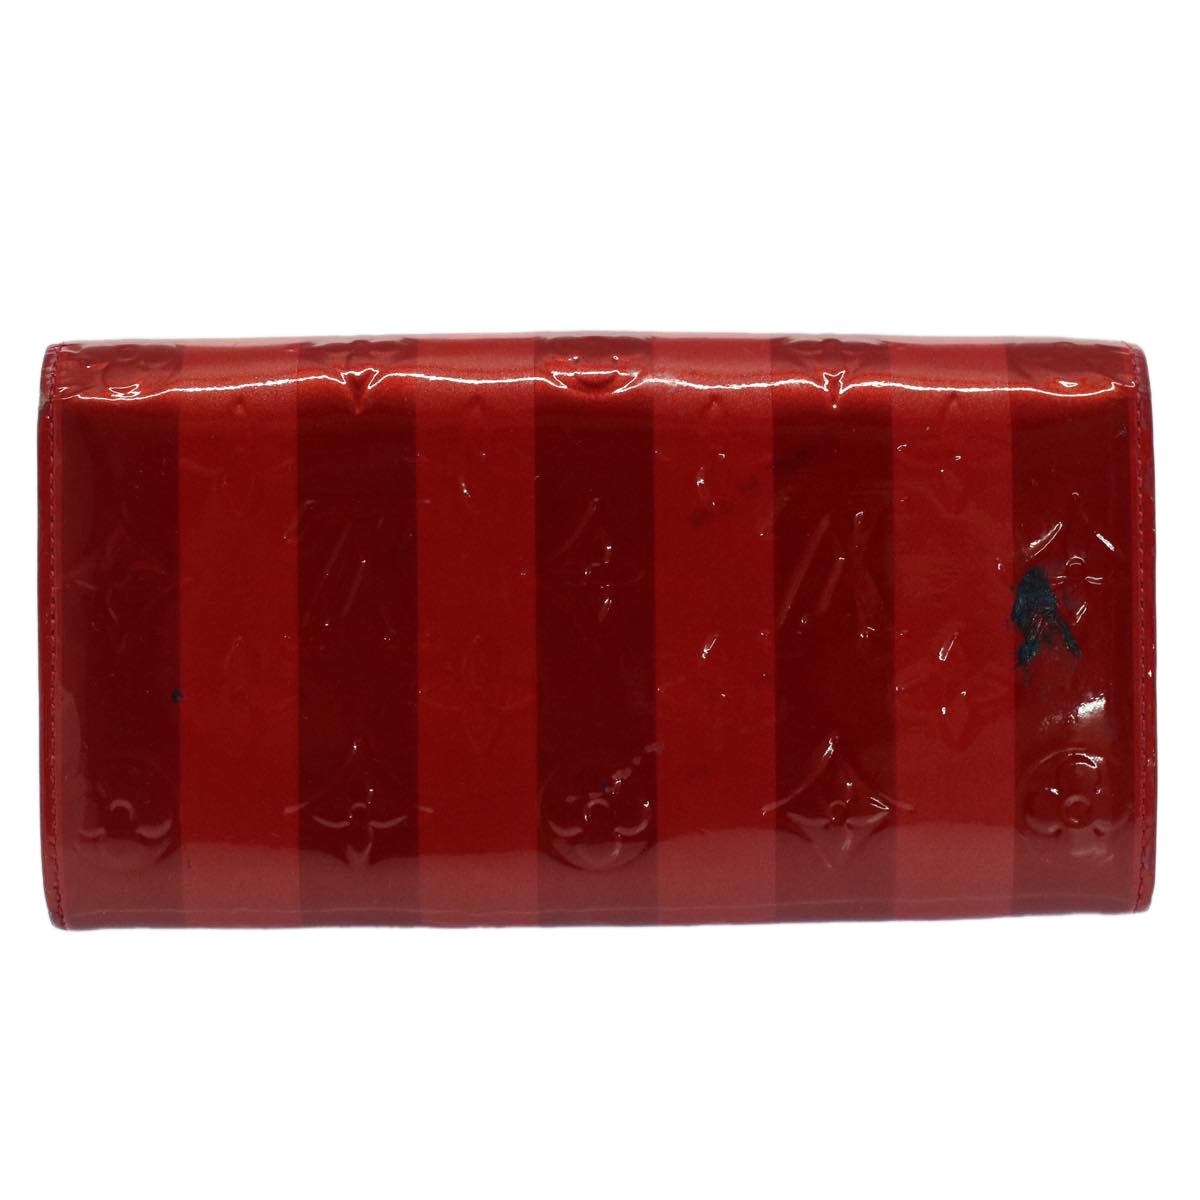 LOUIS VUITTON Vernis Rayure Portefeiulle Sarah Wallet Red M91716 LV Auth 51586 - 0